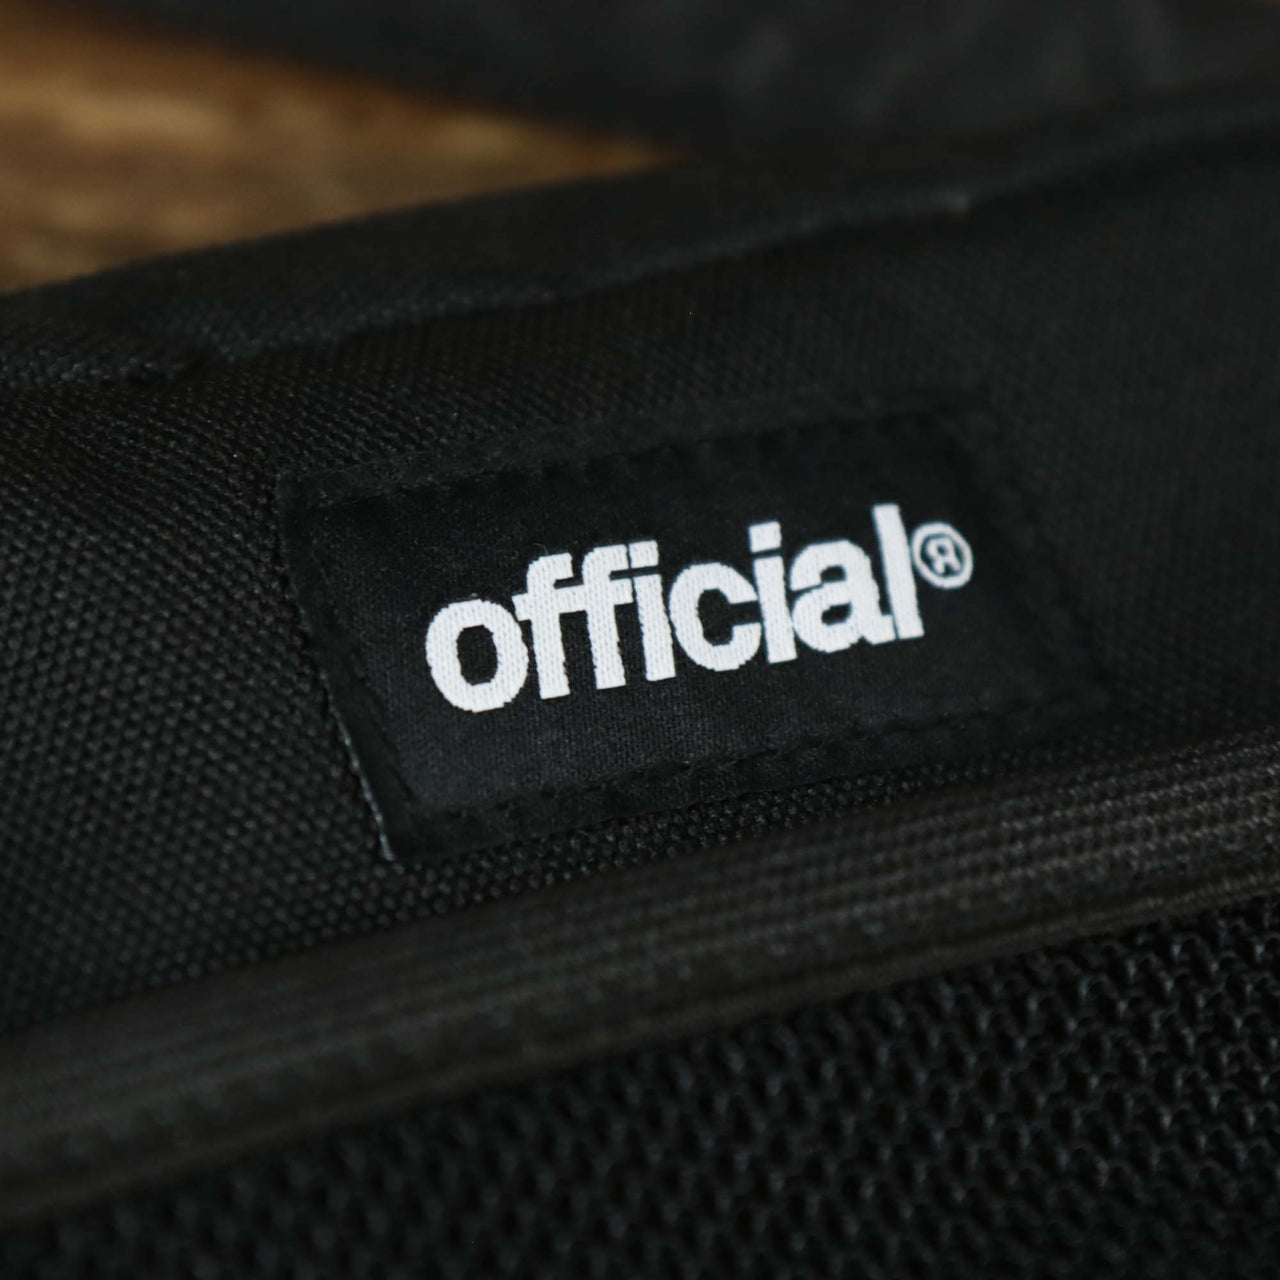 The official tag on the UVC Sterilization Shoulder Bag Streetwear | Official Black